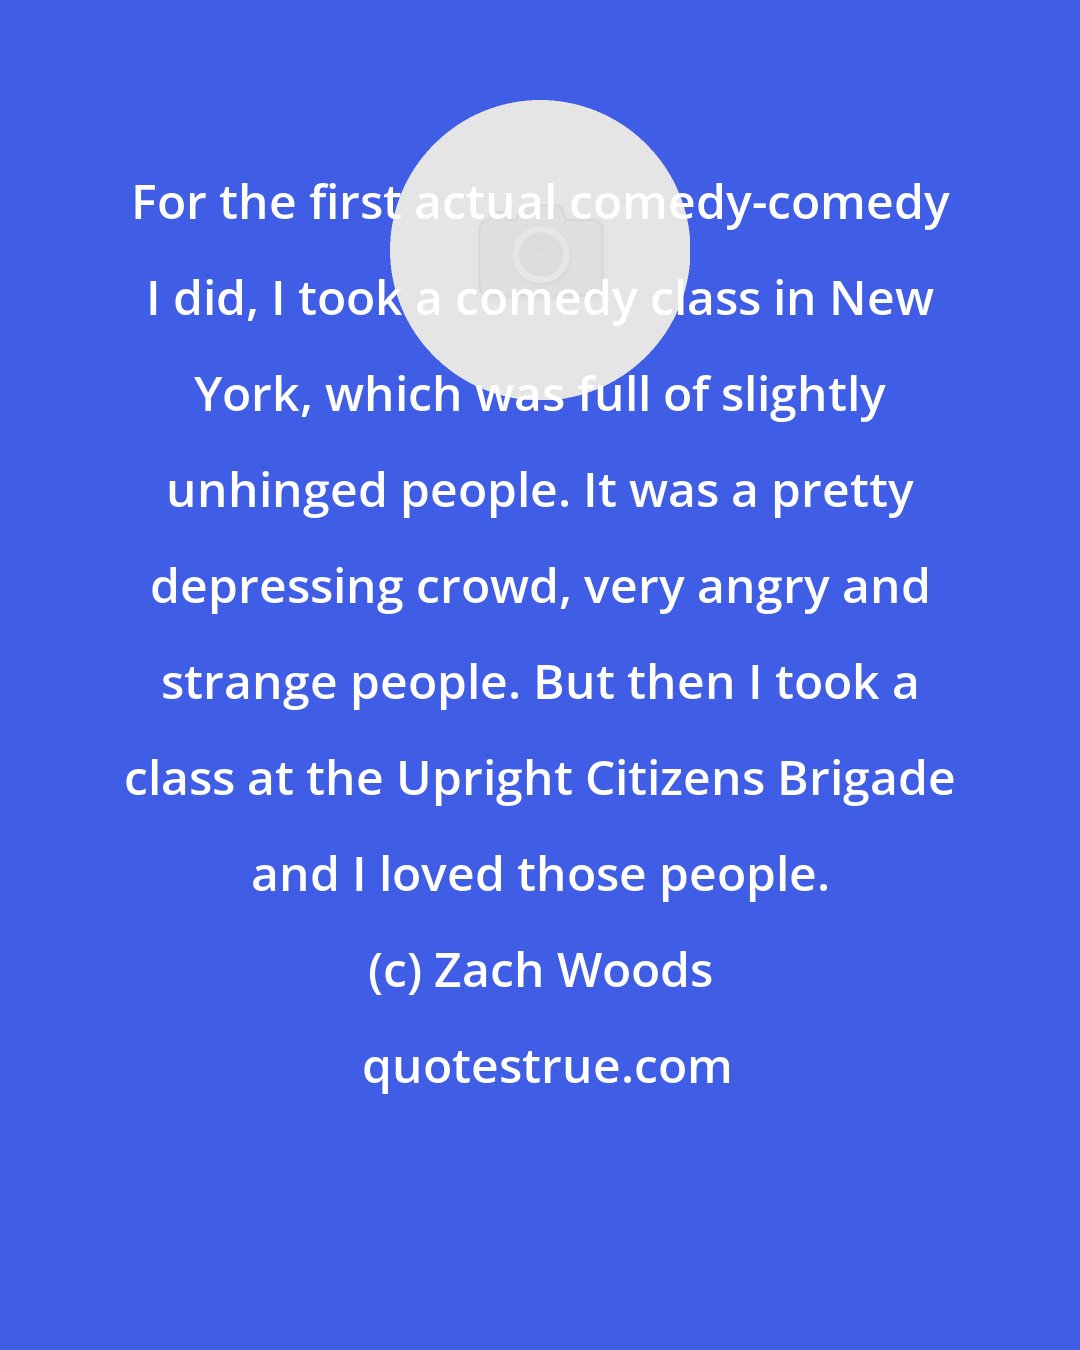 Zach Woods: For the first actual comedy-comedy I did, I took a comedy class in New York, which was full of slightly unhinged people. It was a pretty depressing crowd, very angry and strange people. But then I took a class at the Upright Citizens Brigade and I loved those people.